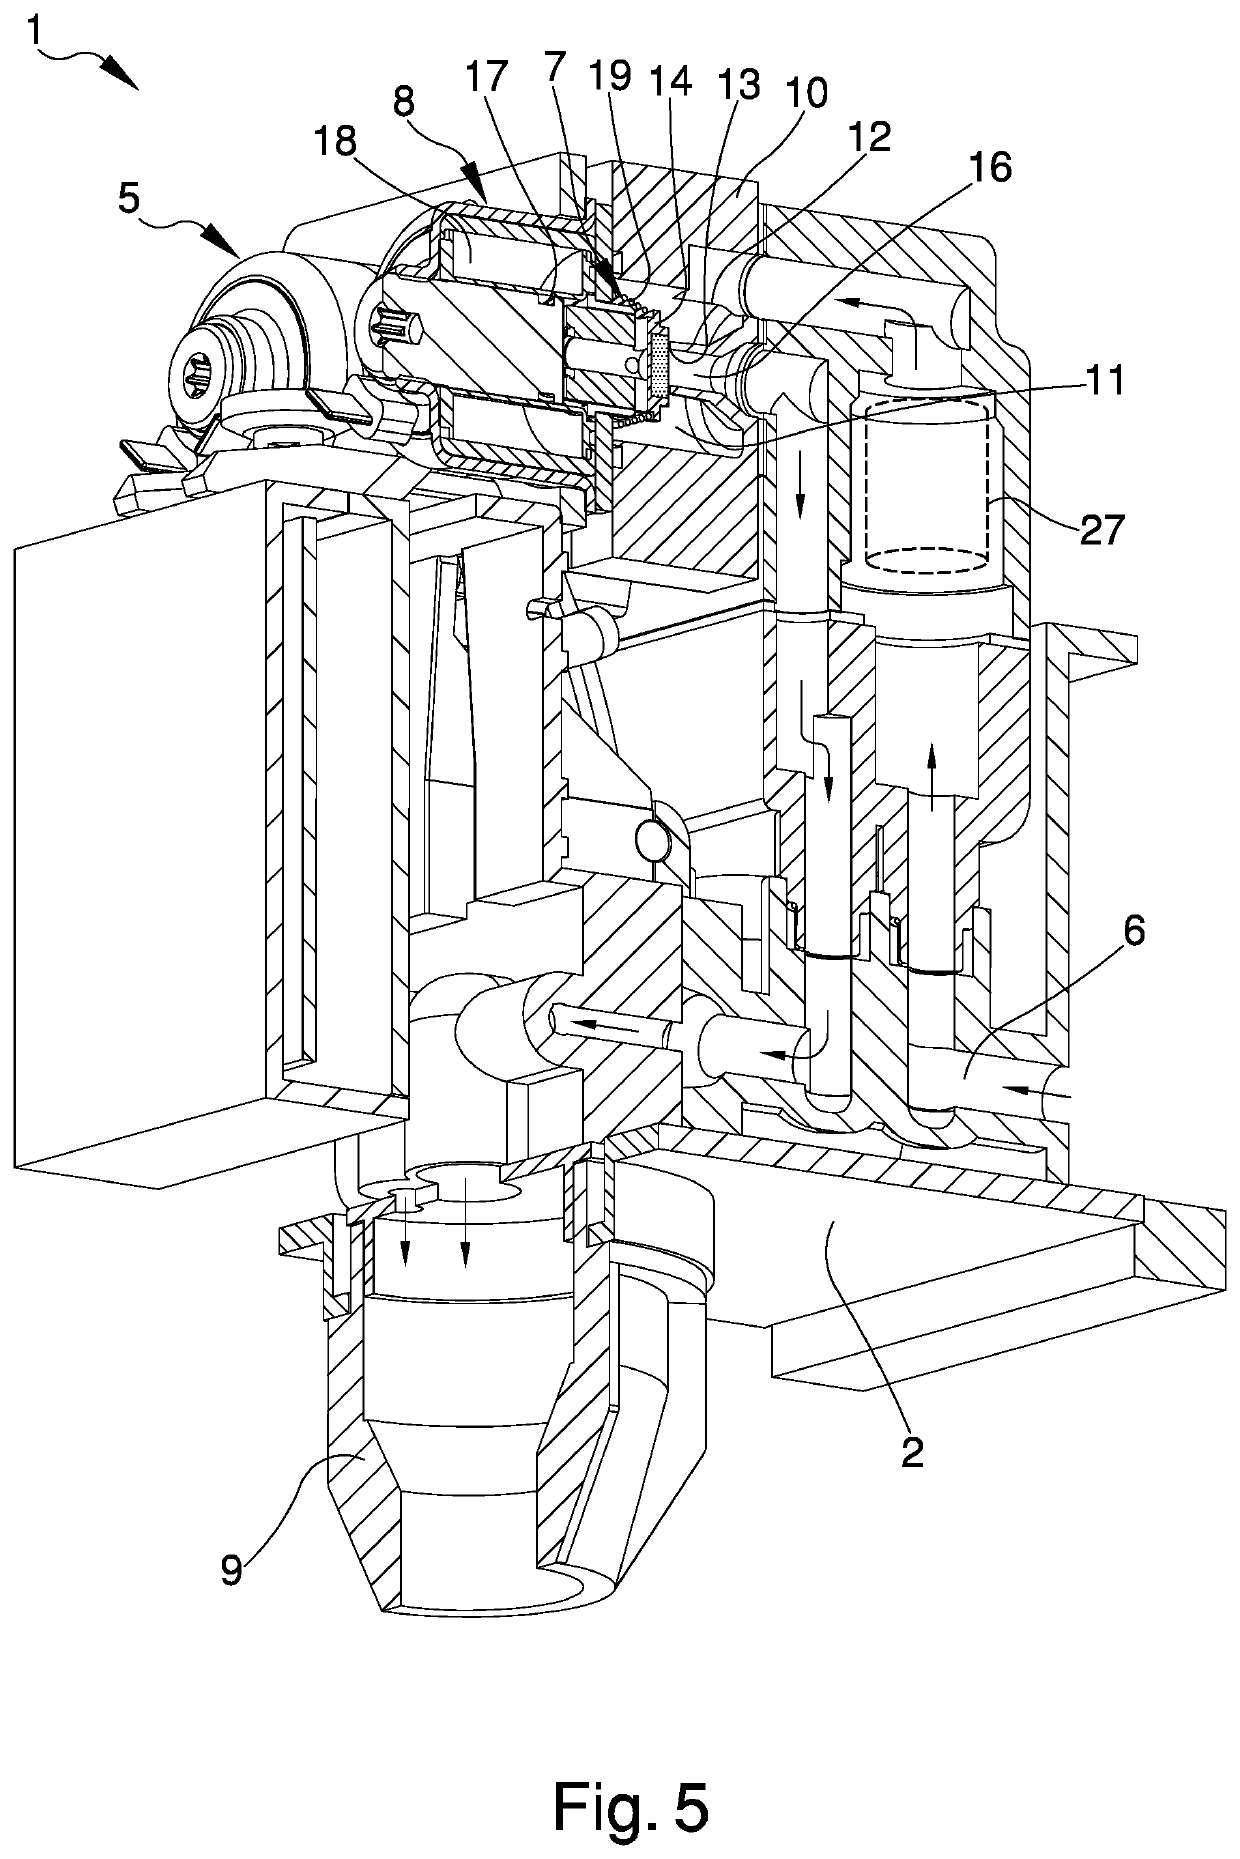 Device for the mixing of fluids